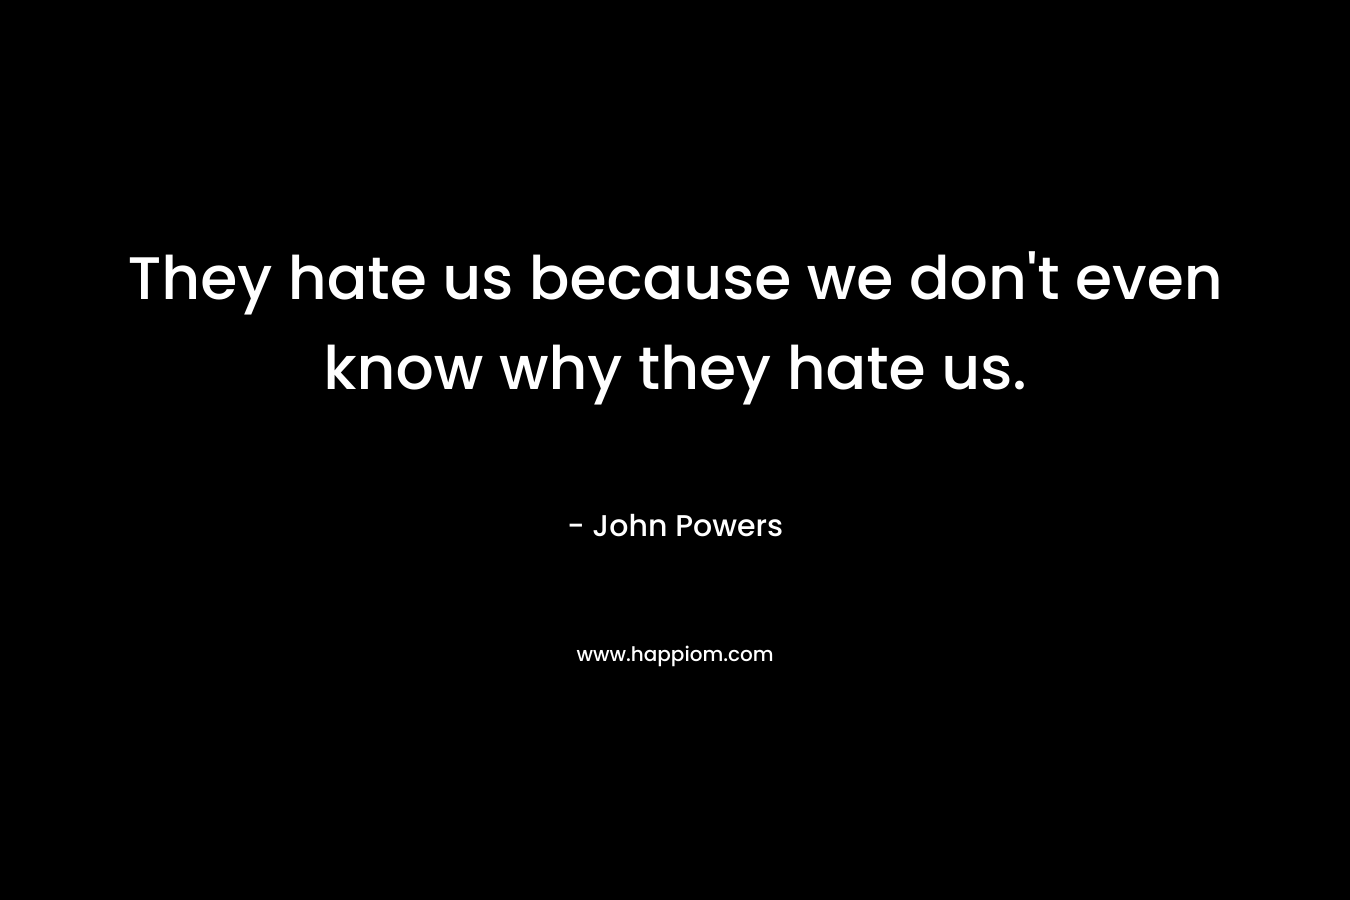 They hate us because we don't even know why they hate us.